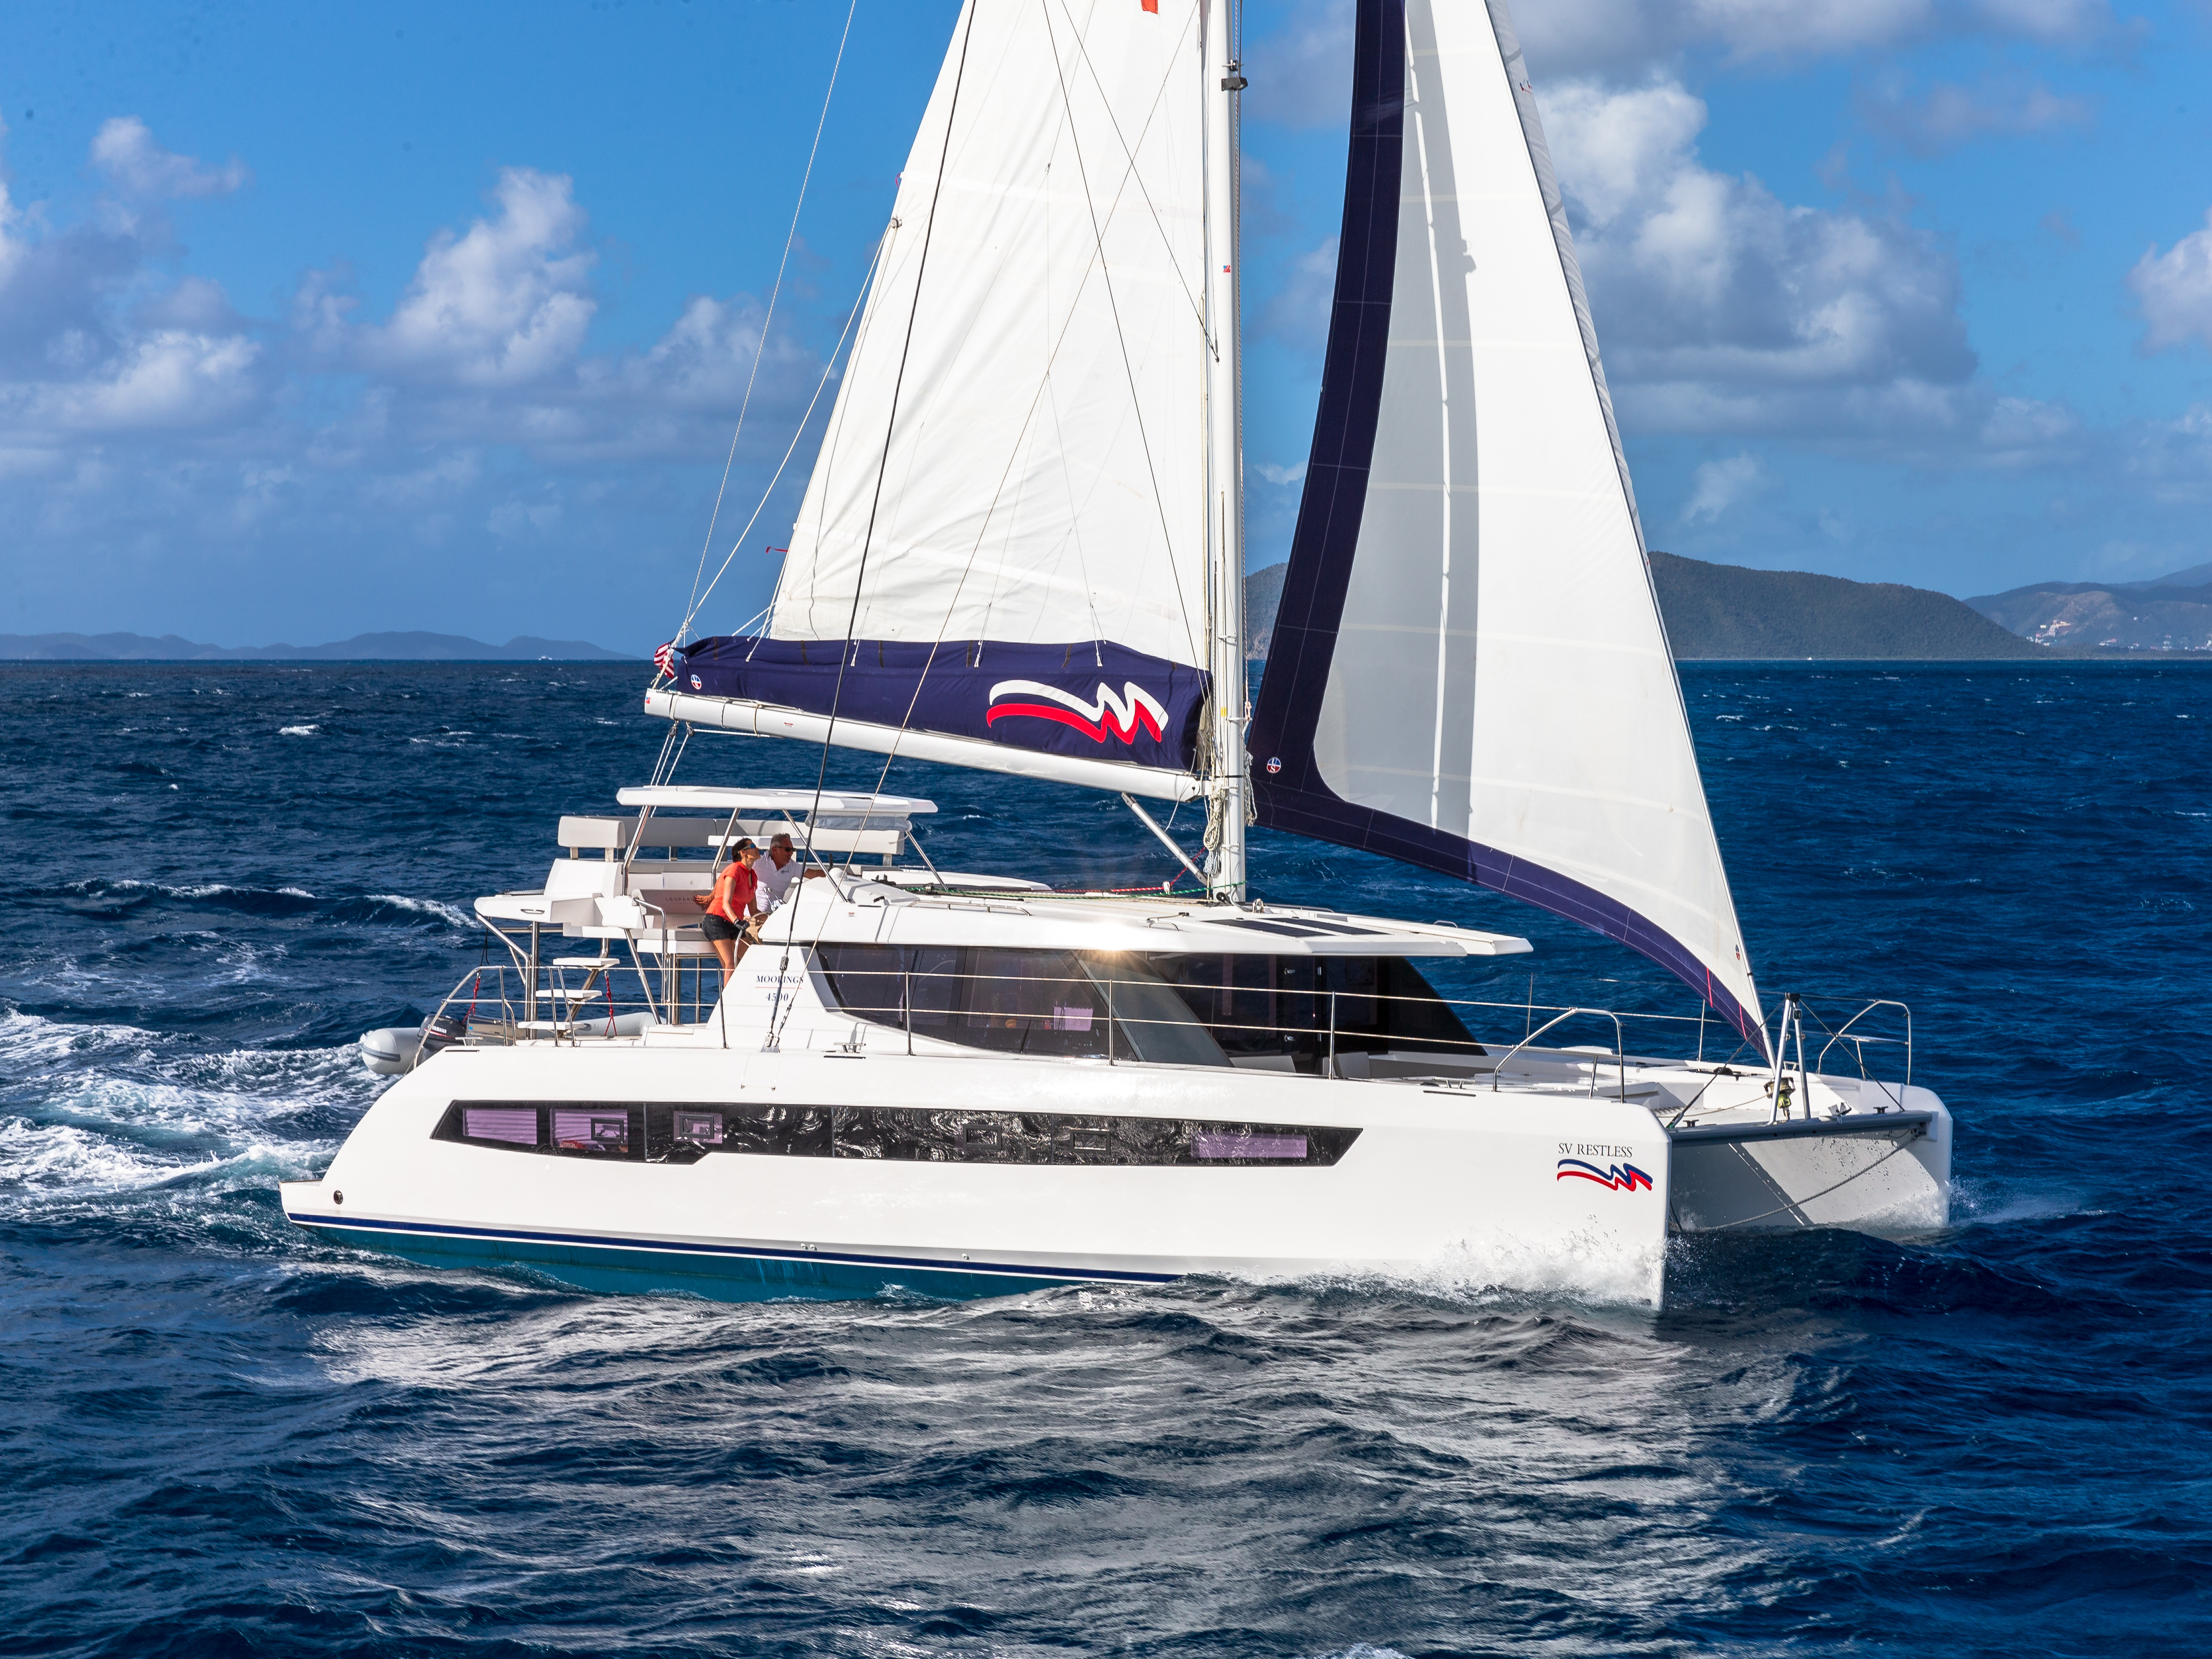 Leopard 45 - Yacht Charter Saint Lucia & Boat hire in St. Lucia Gros Islet Rodney Bay Marina 3